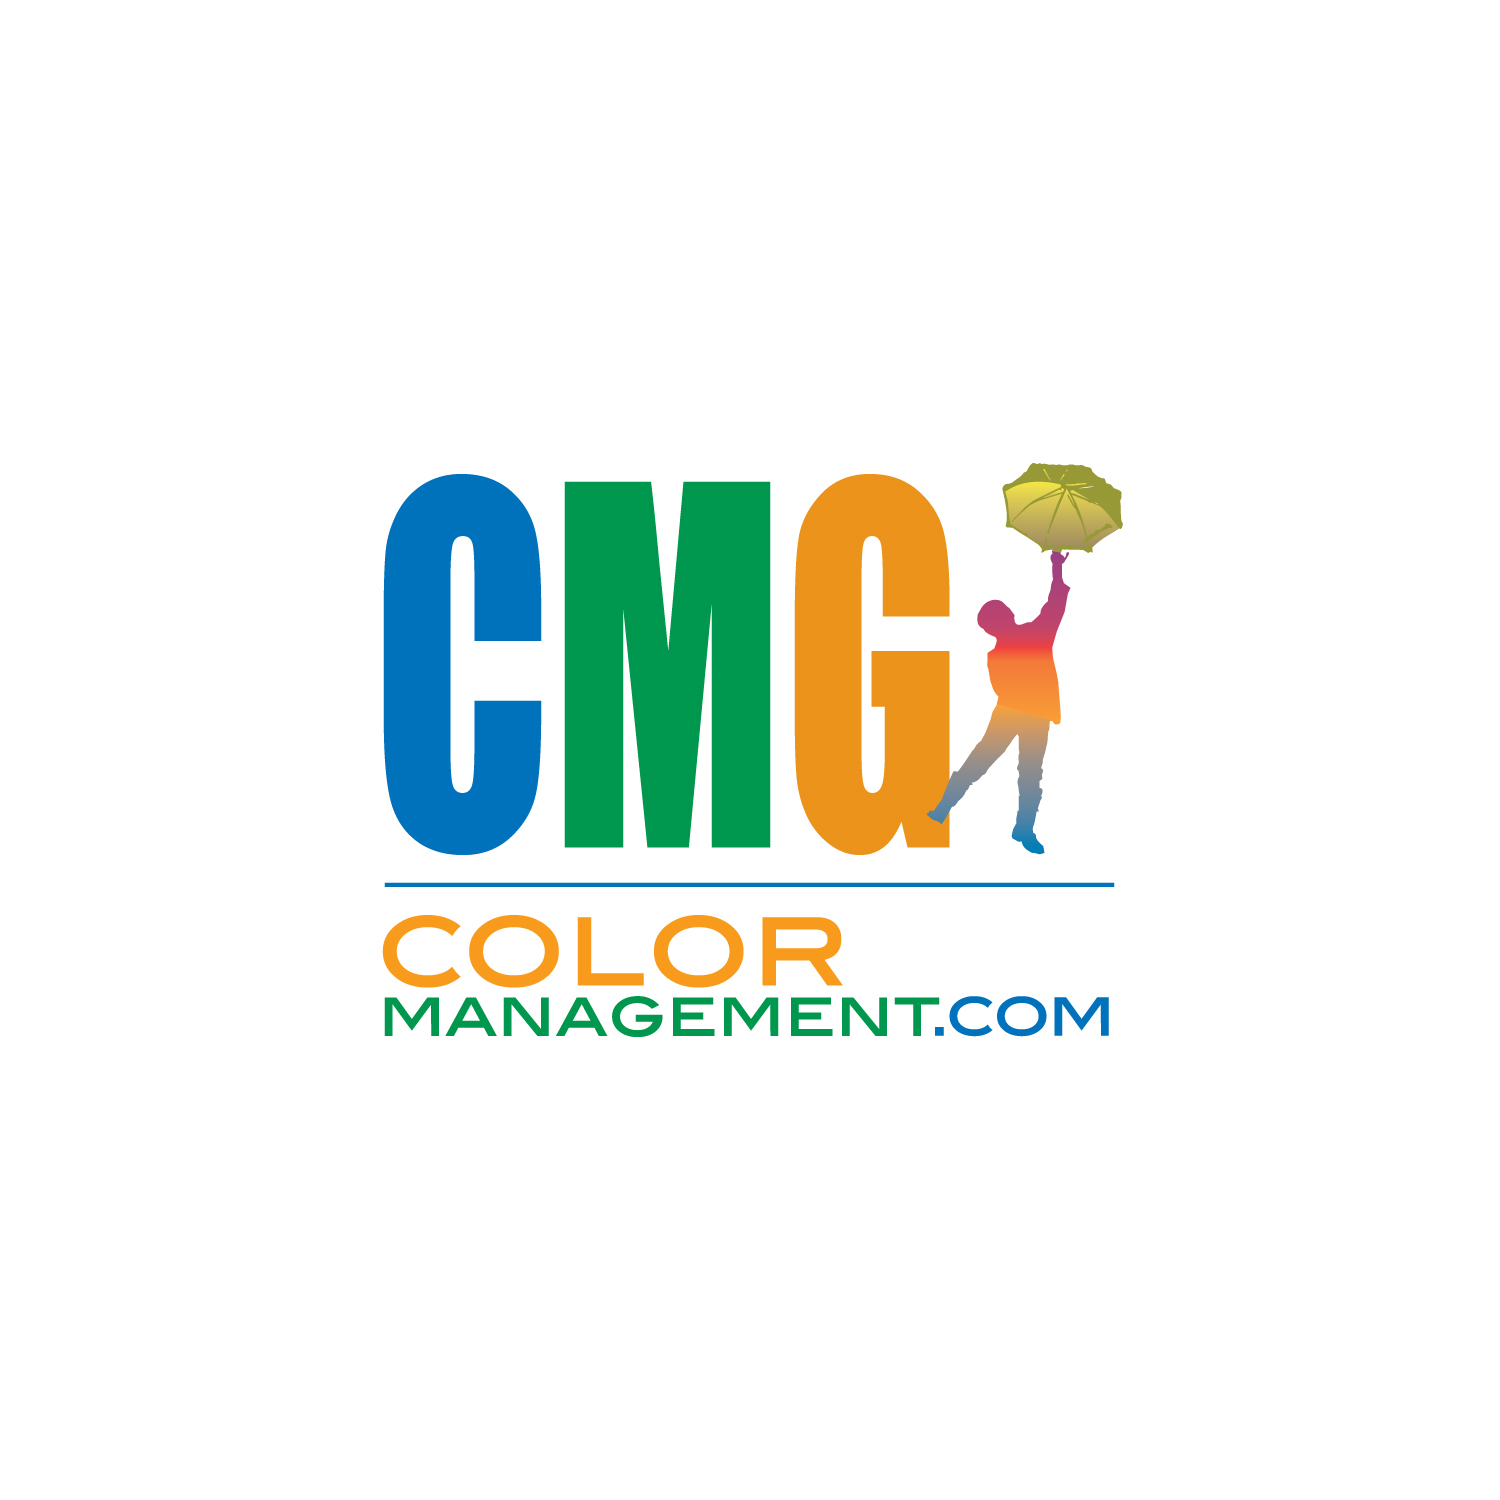 Unlock the Power of Packaging and Control your Brand Colors - Cincinnati, OH